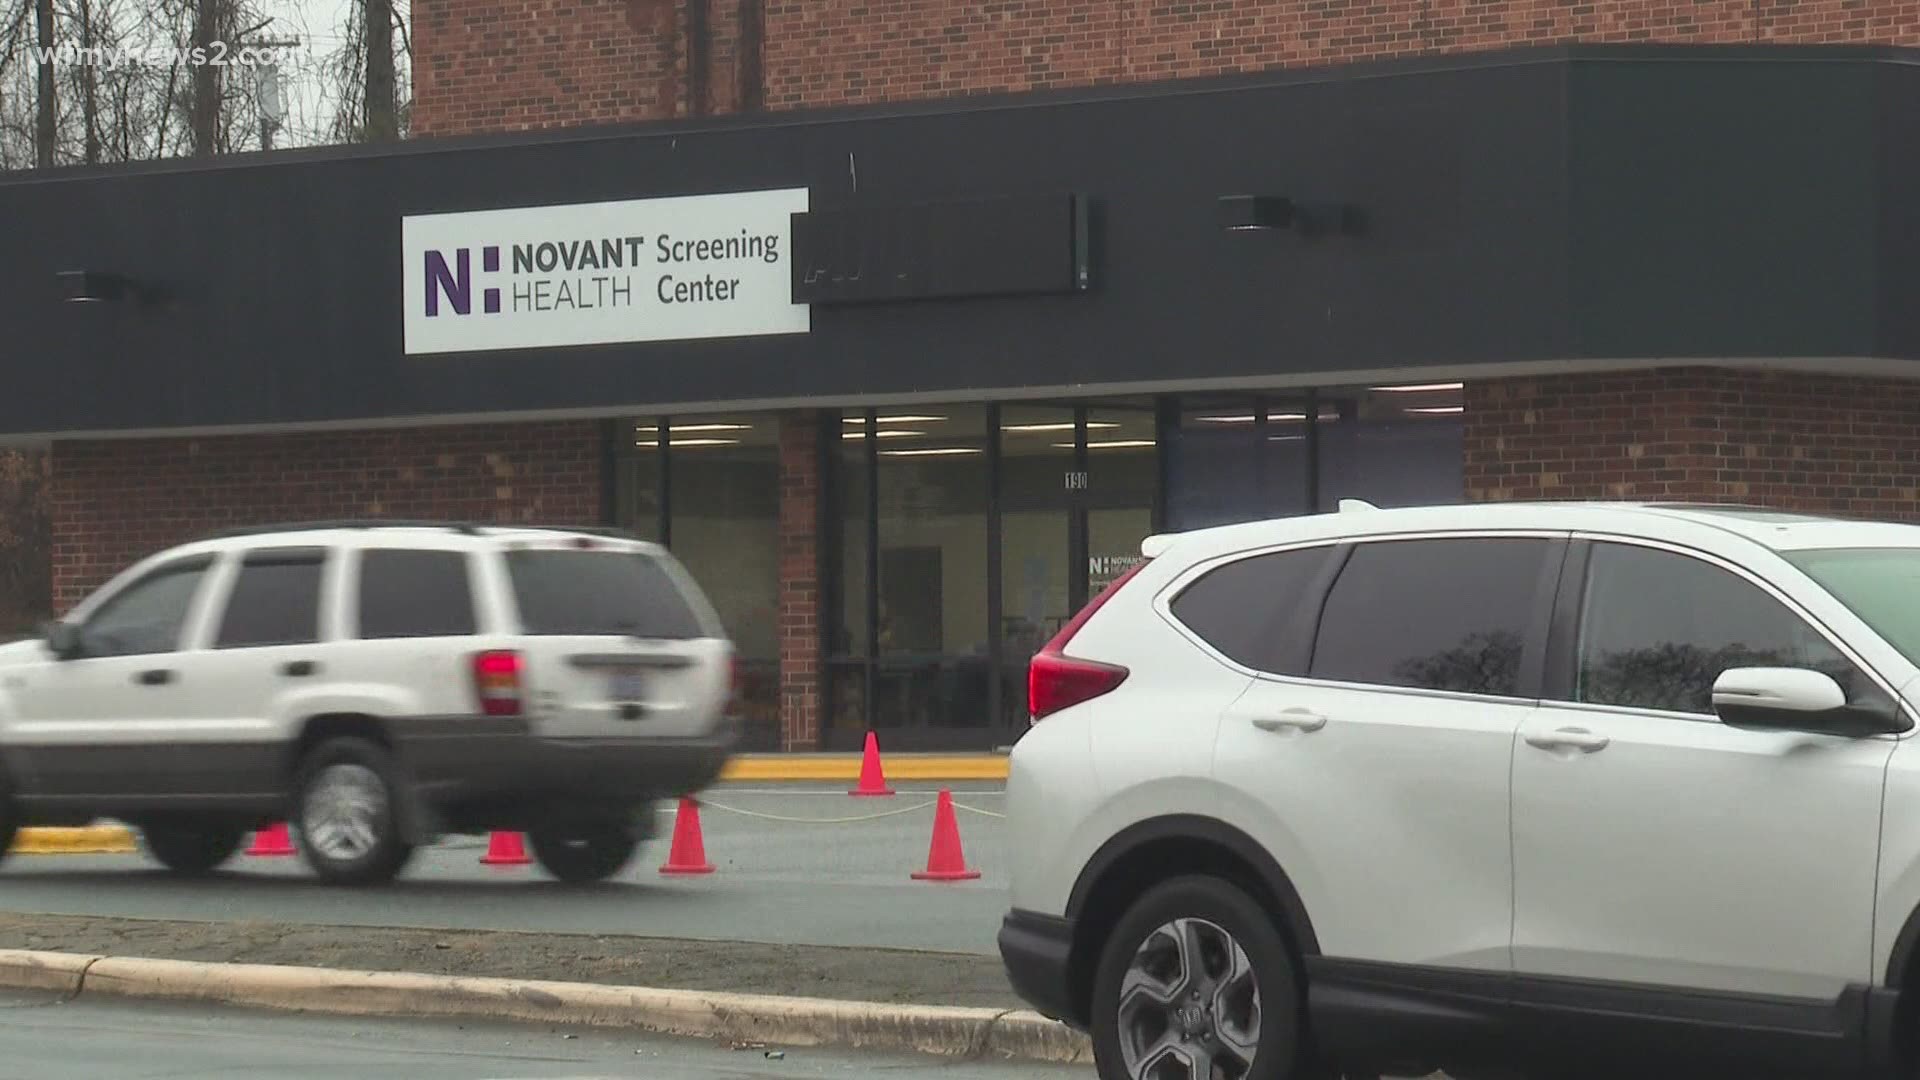 Novant Health is getting ready to open a mass-vaccination clinic, the problem is they need more vaccines from the state.